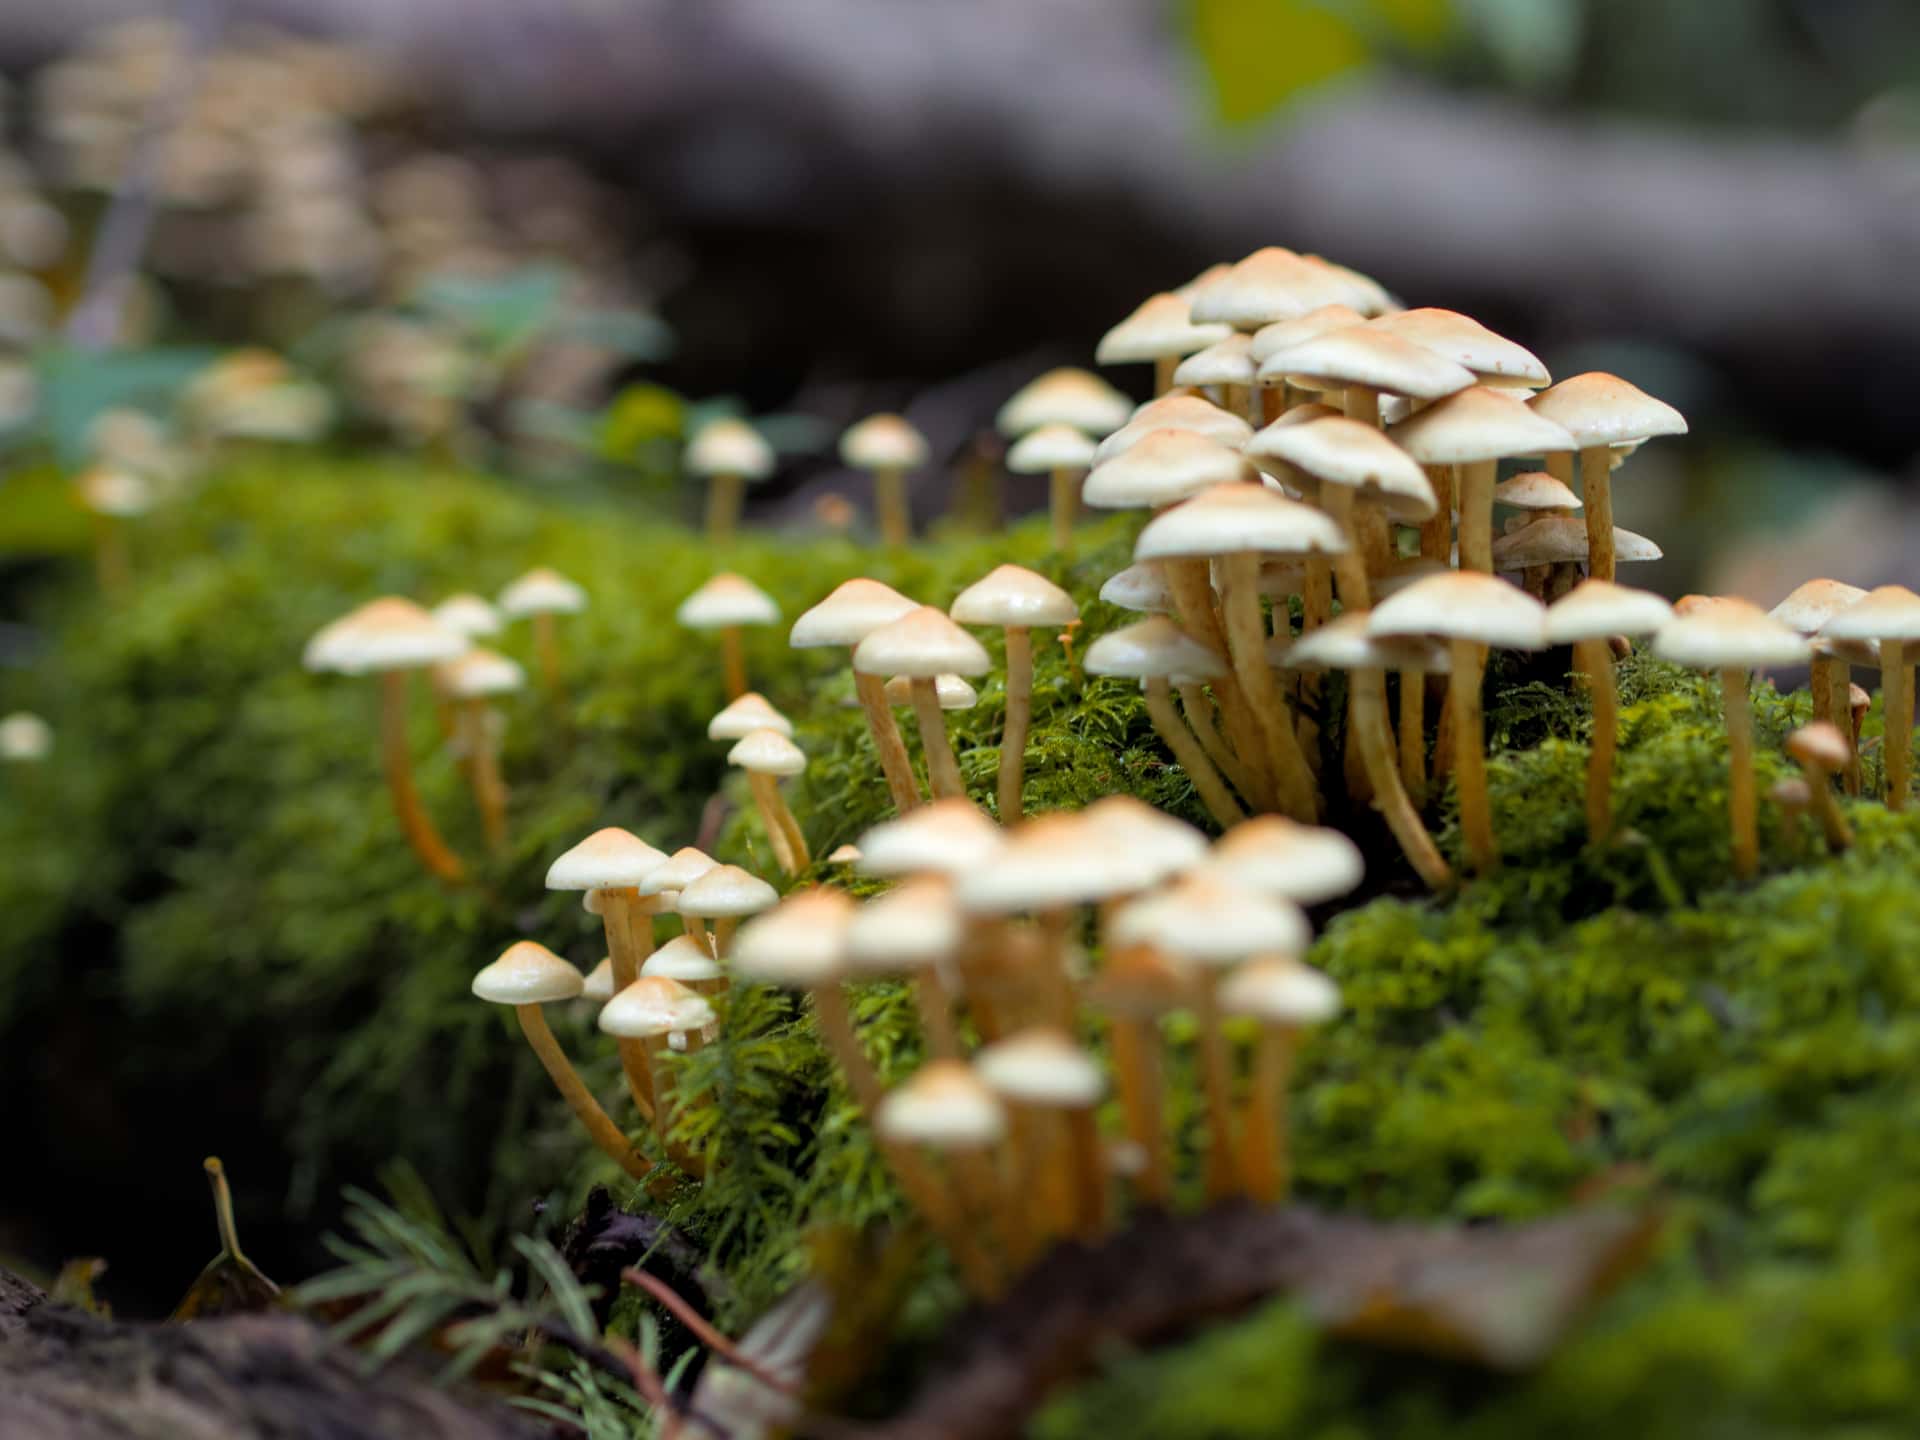 clusters of small mushrooms rising above moss on a fallen log